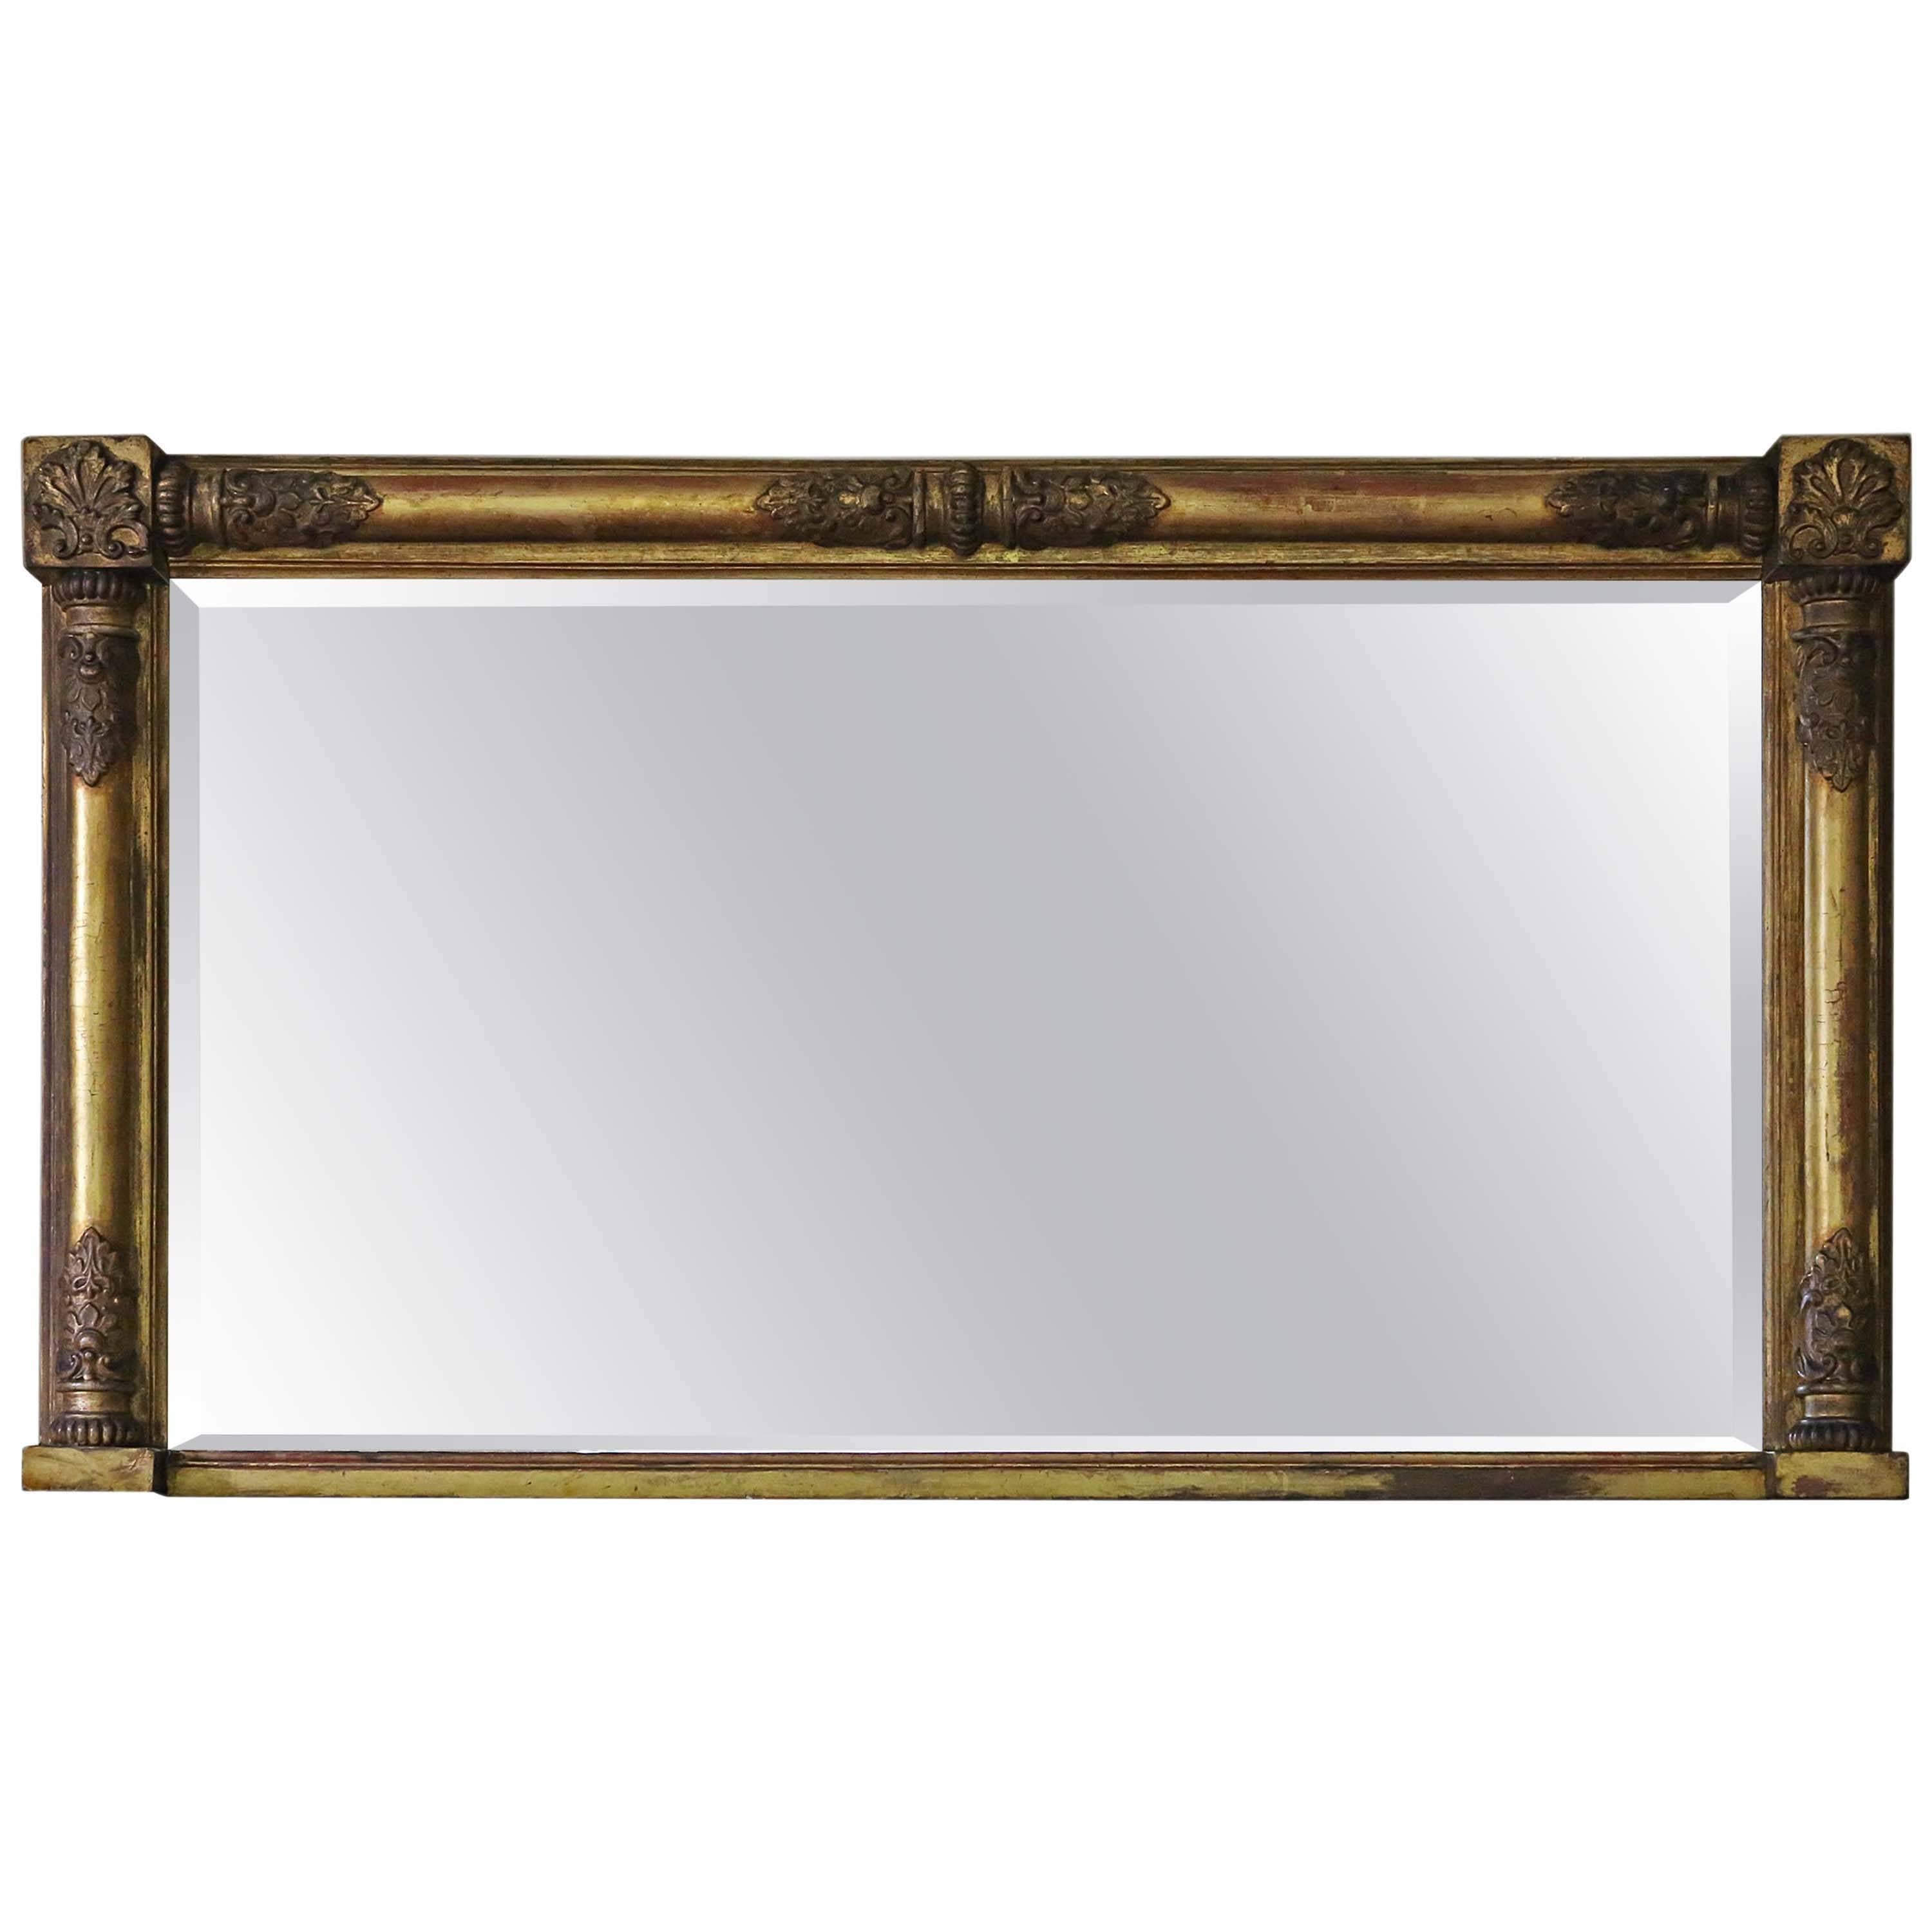 Antique Large 19th Century Victorian Gilt Overmantel Wall Mirror For Sale